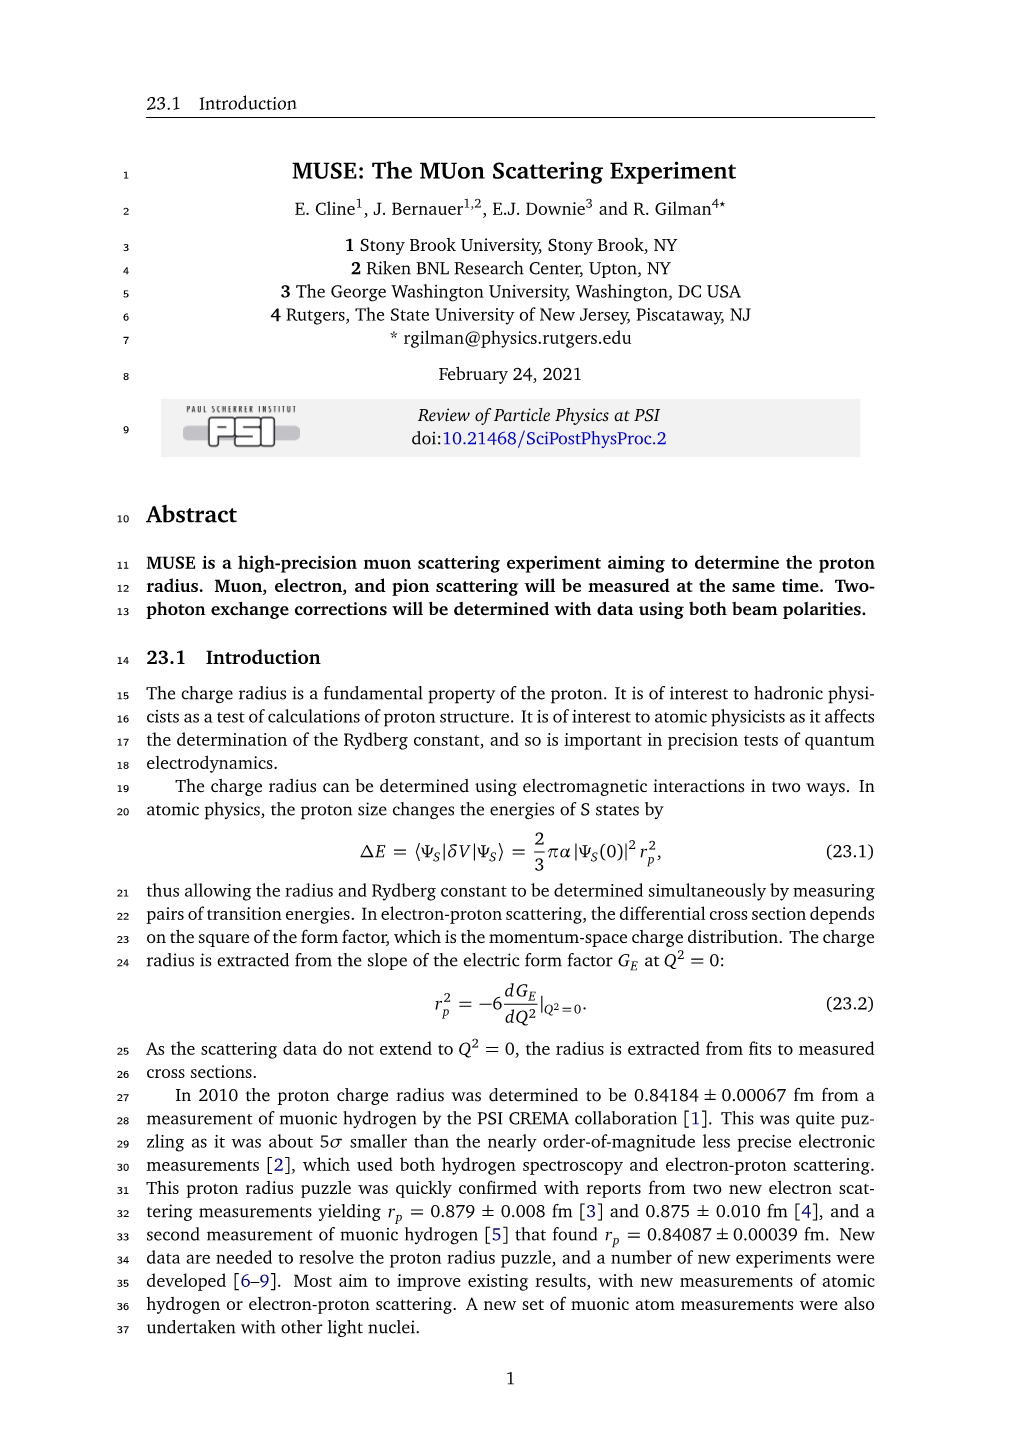 The Muon Scattering Experiment Abstract